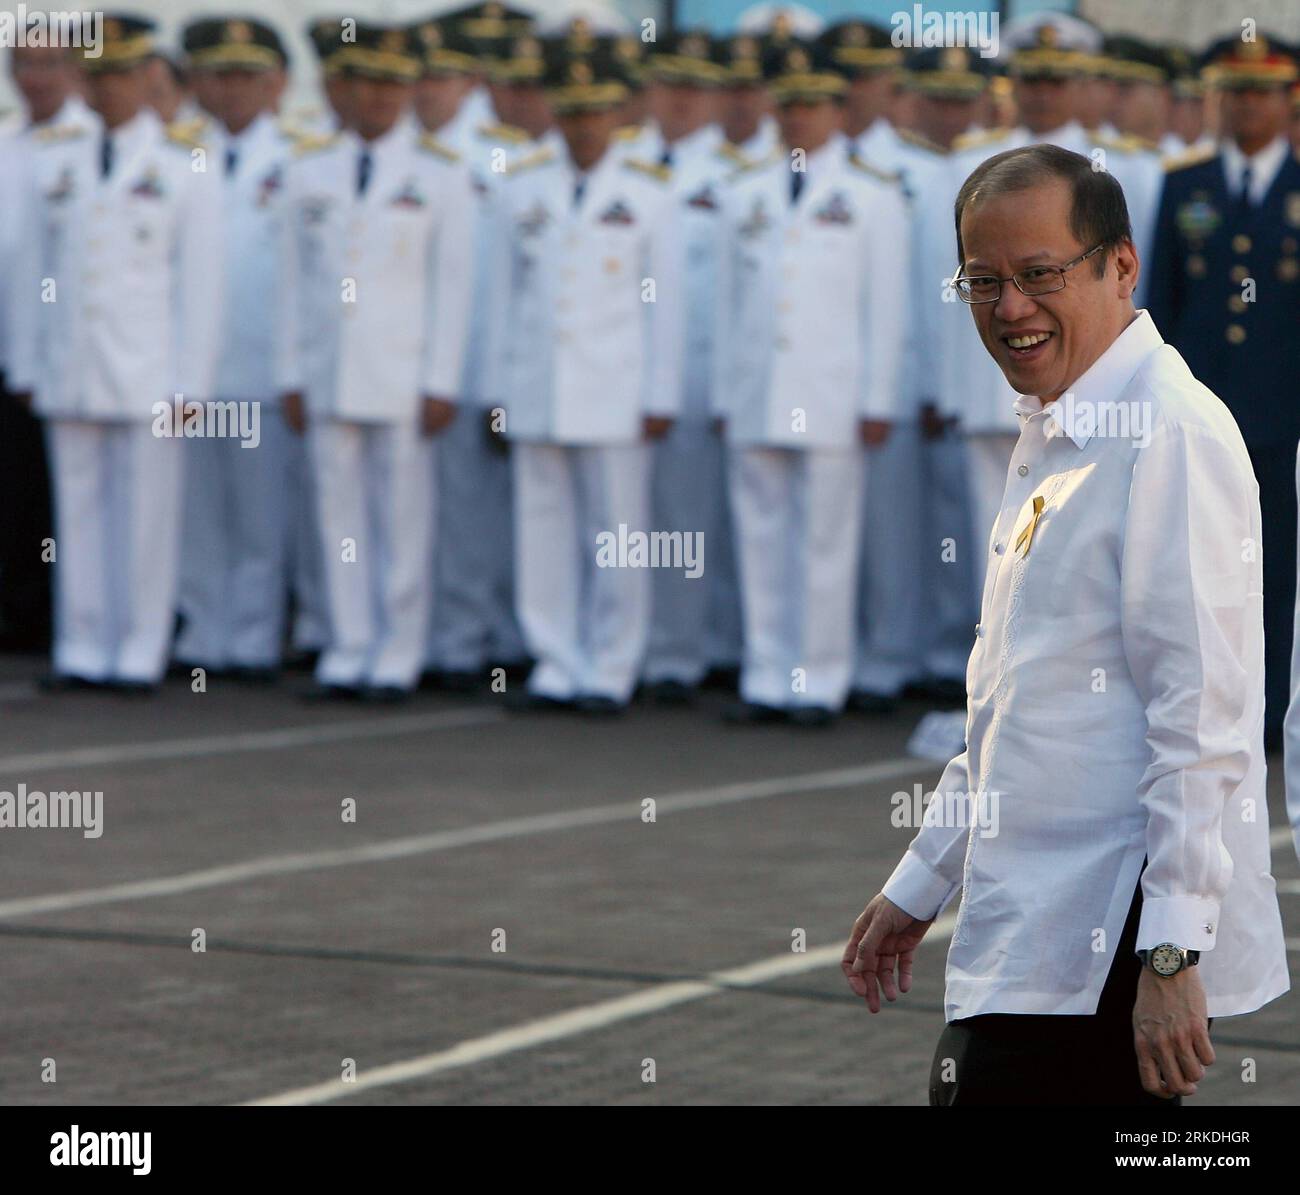 Bildnummer: 54955016  Datum: 25.02.2011  Copyright: imago/Xinhua (110225) -- MANILA, Feb. 25, 2011 (Xinhua) -- Philippine President Benigno Noynoy Aquino III smiles as he walks in front of military officers as they celebrate the 25th anniversary of the Power Revolution in Quezon City, north of Manila, the Philippines, Feb. 25, 2011. Exactly 25 years ago on February 25, 1986, the bloodless 4-day power revolution ousted the late dictator Ferdinand Marcos and was replaced by the late President Corazon Aquino, the mother of current President Benigno Aquino III. (Xinhua/Rouelle Umali)(ypf) PHILIPPI Stock Photo